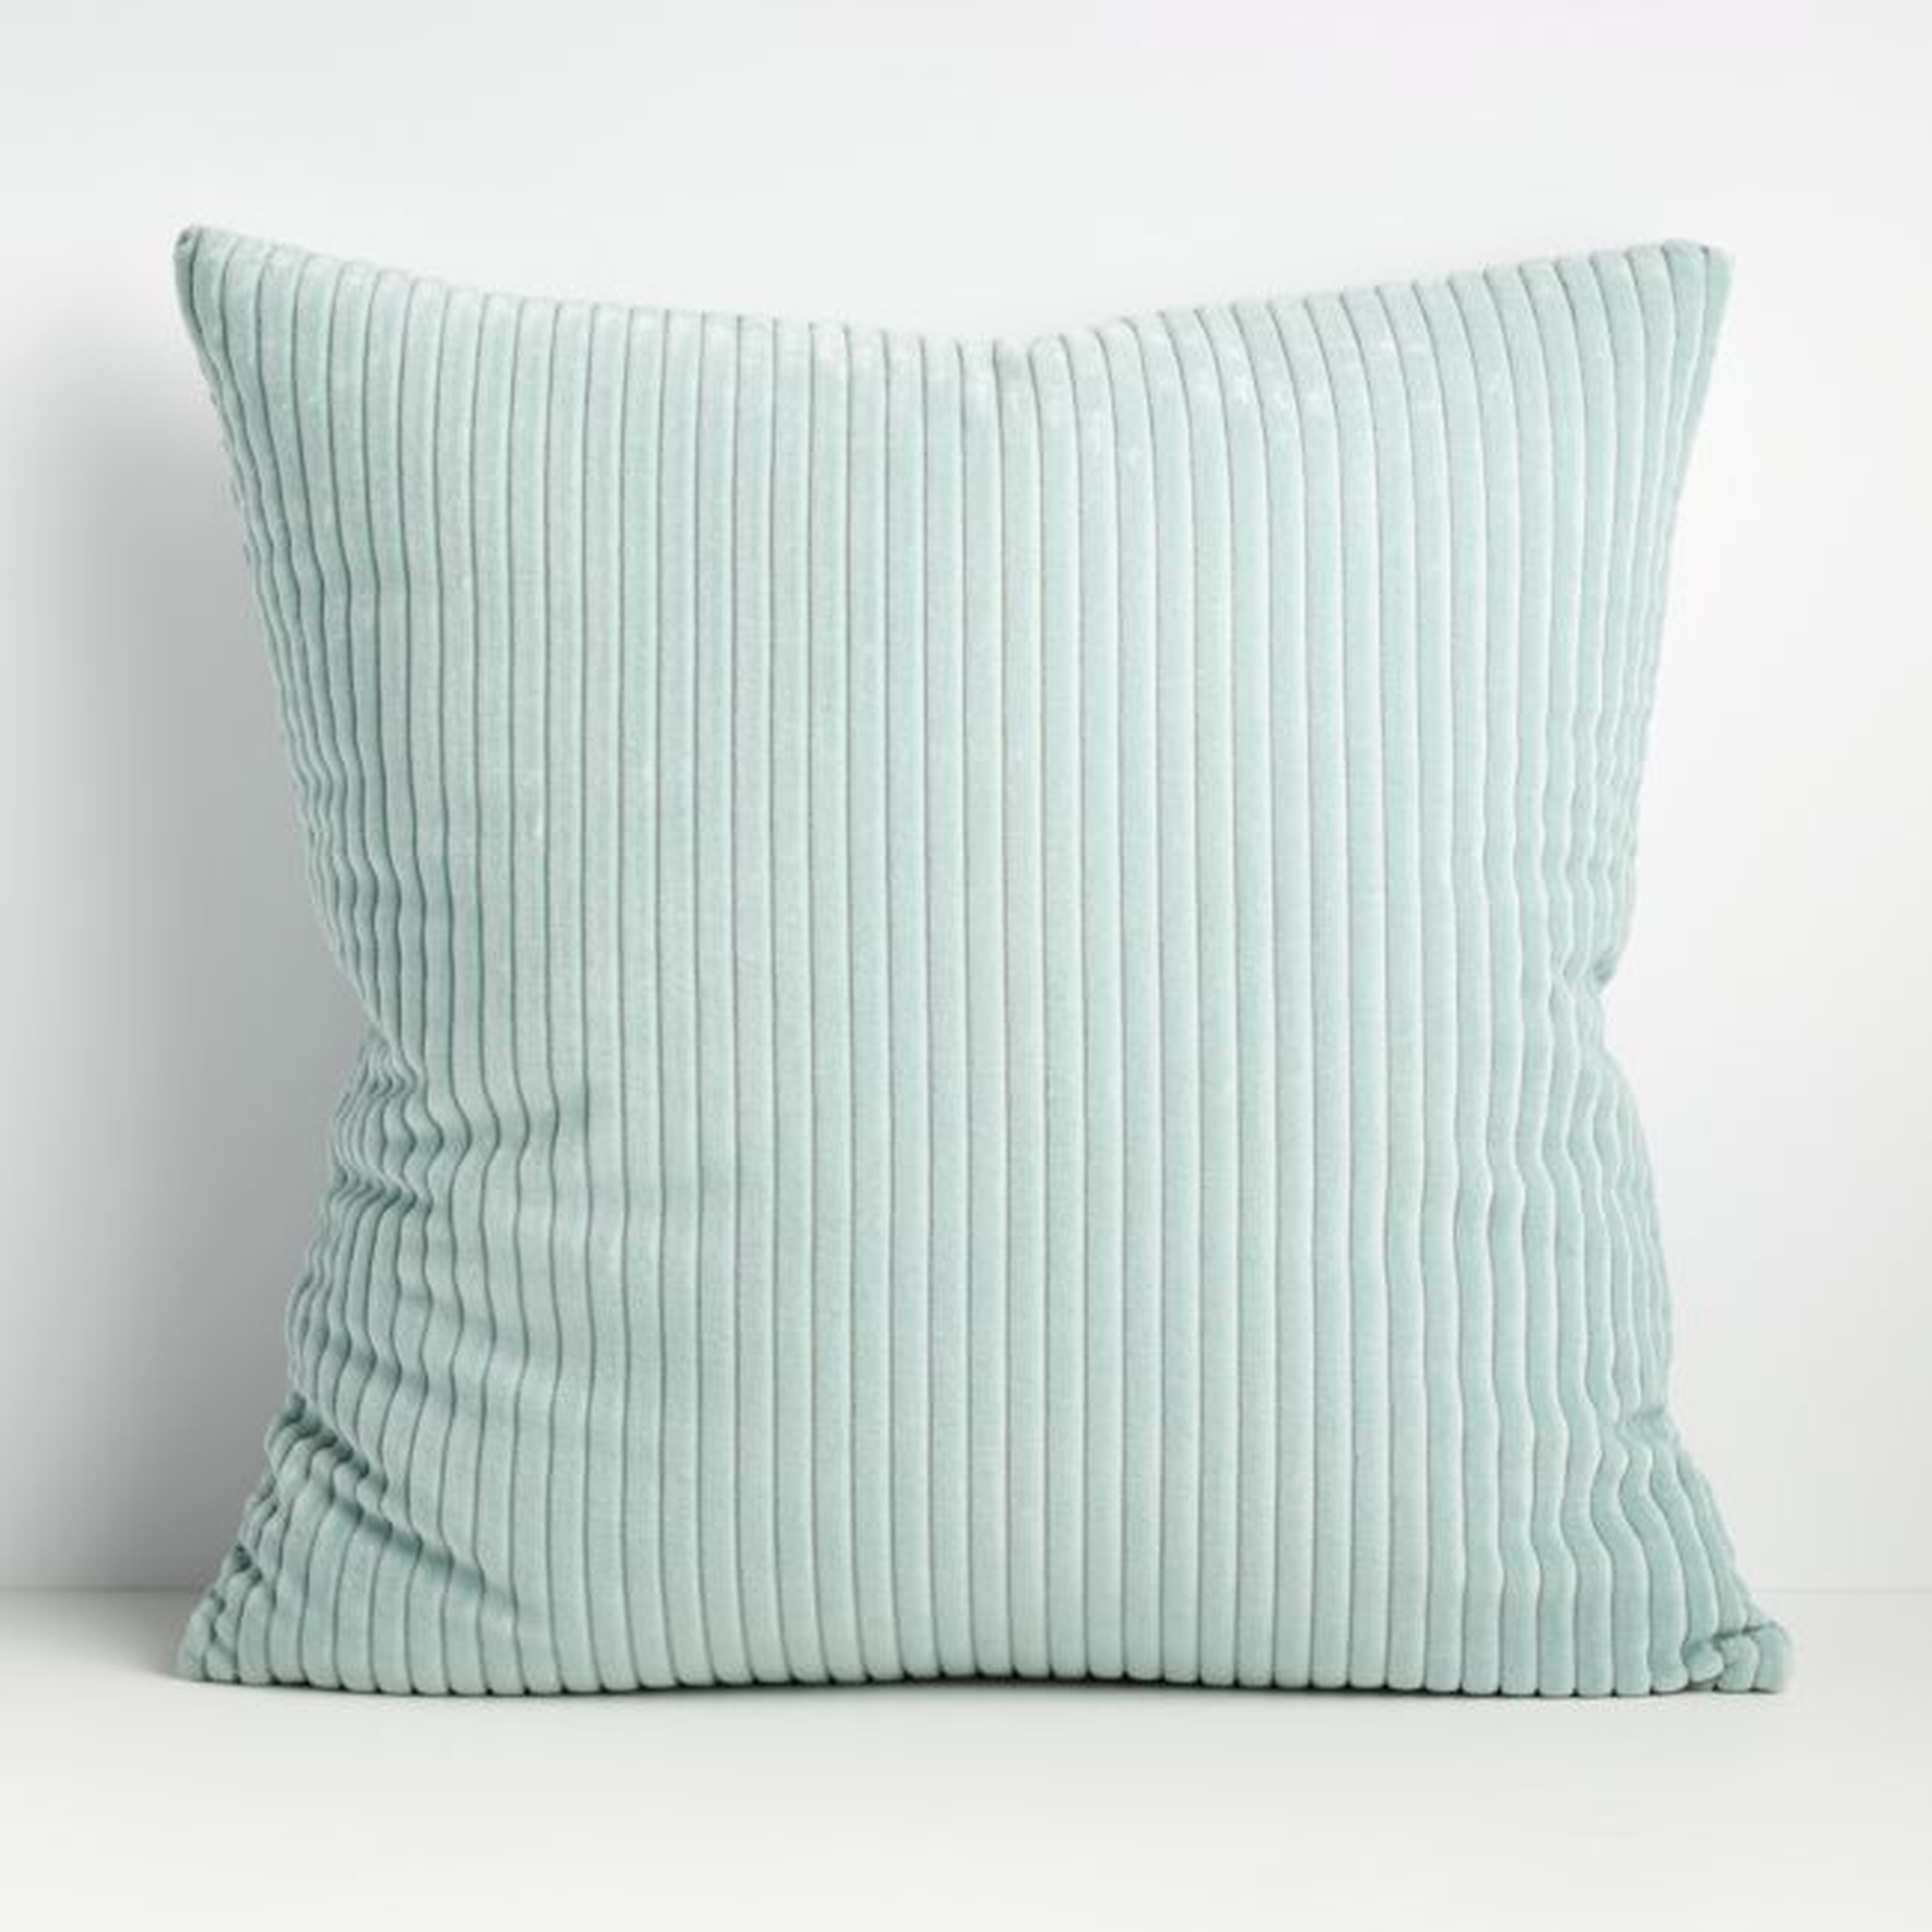 Rae Teal 23" Pillow Pillow with Down-Alternative Insert - Crate and Barrel